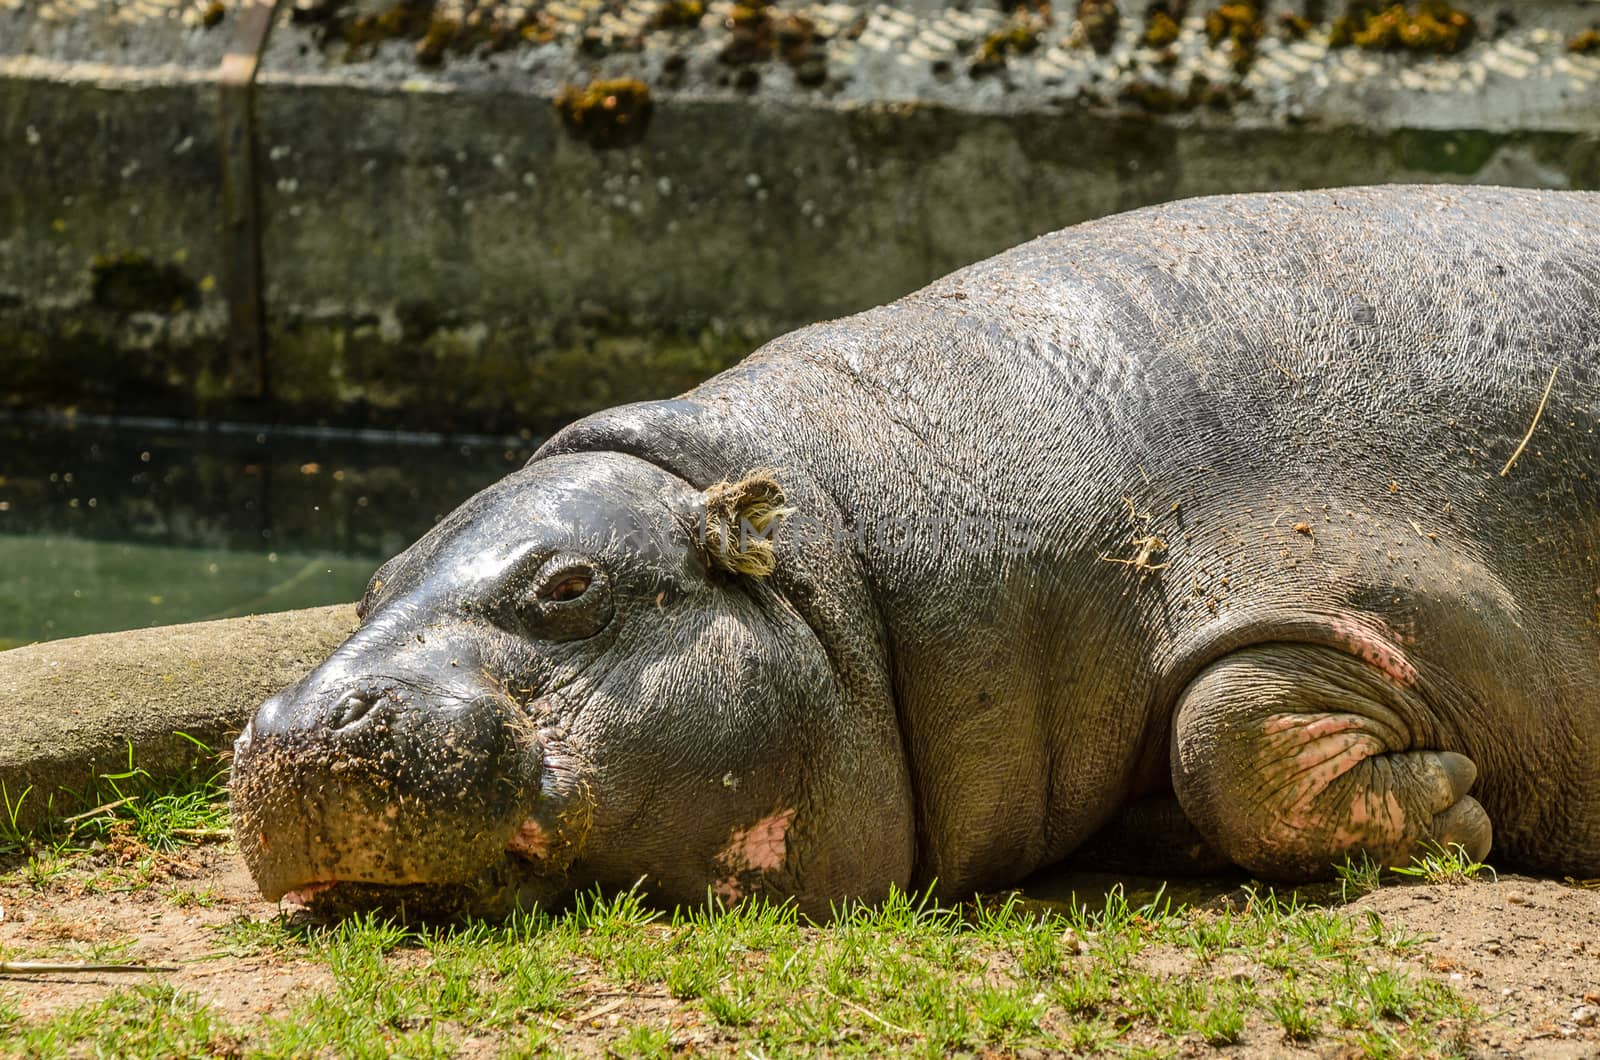 Hippo Lying Down on the Grass on a Hot Sunny Day.